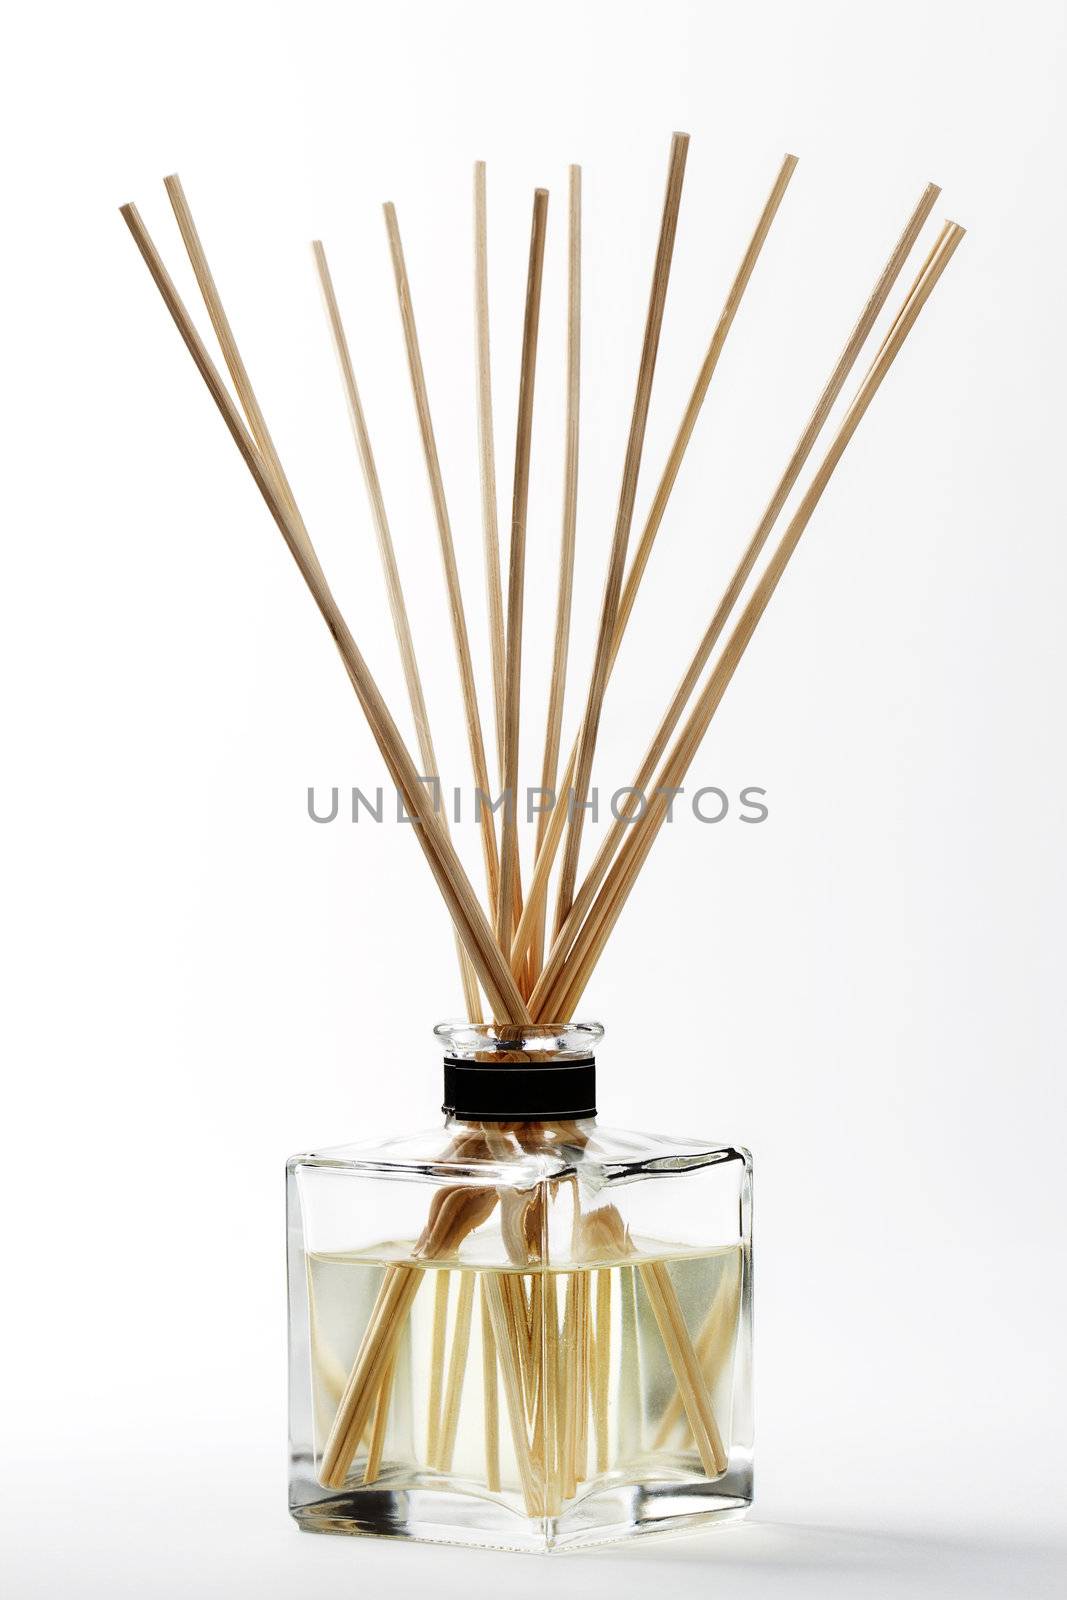 one aroma diffuser with bamboo sticks mounted